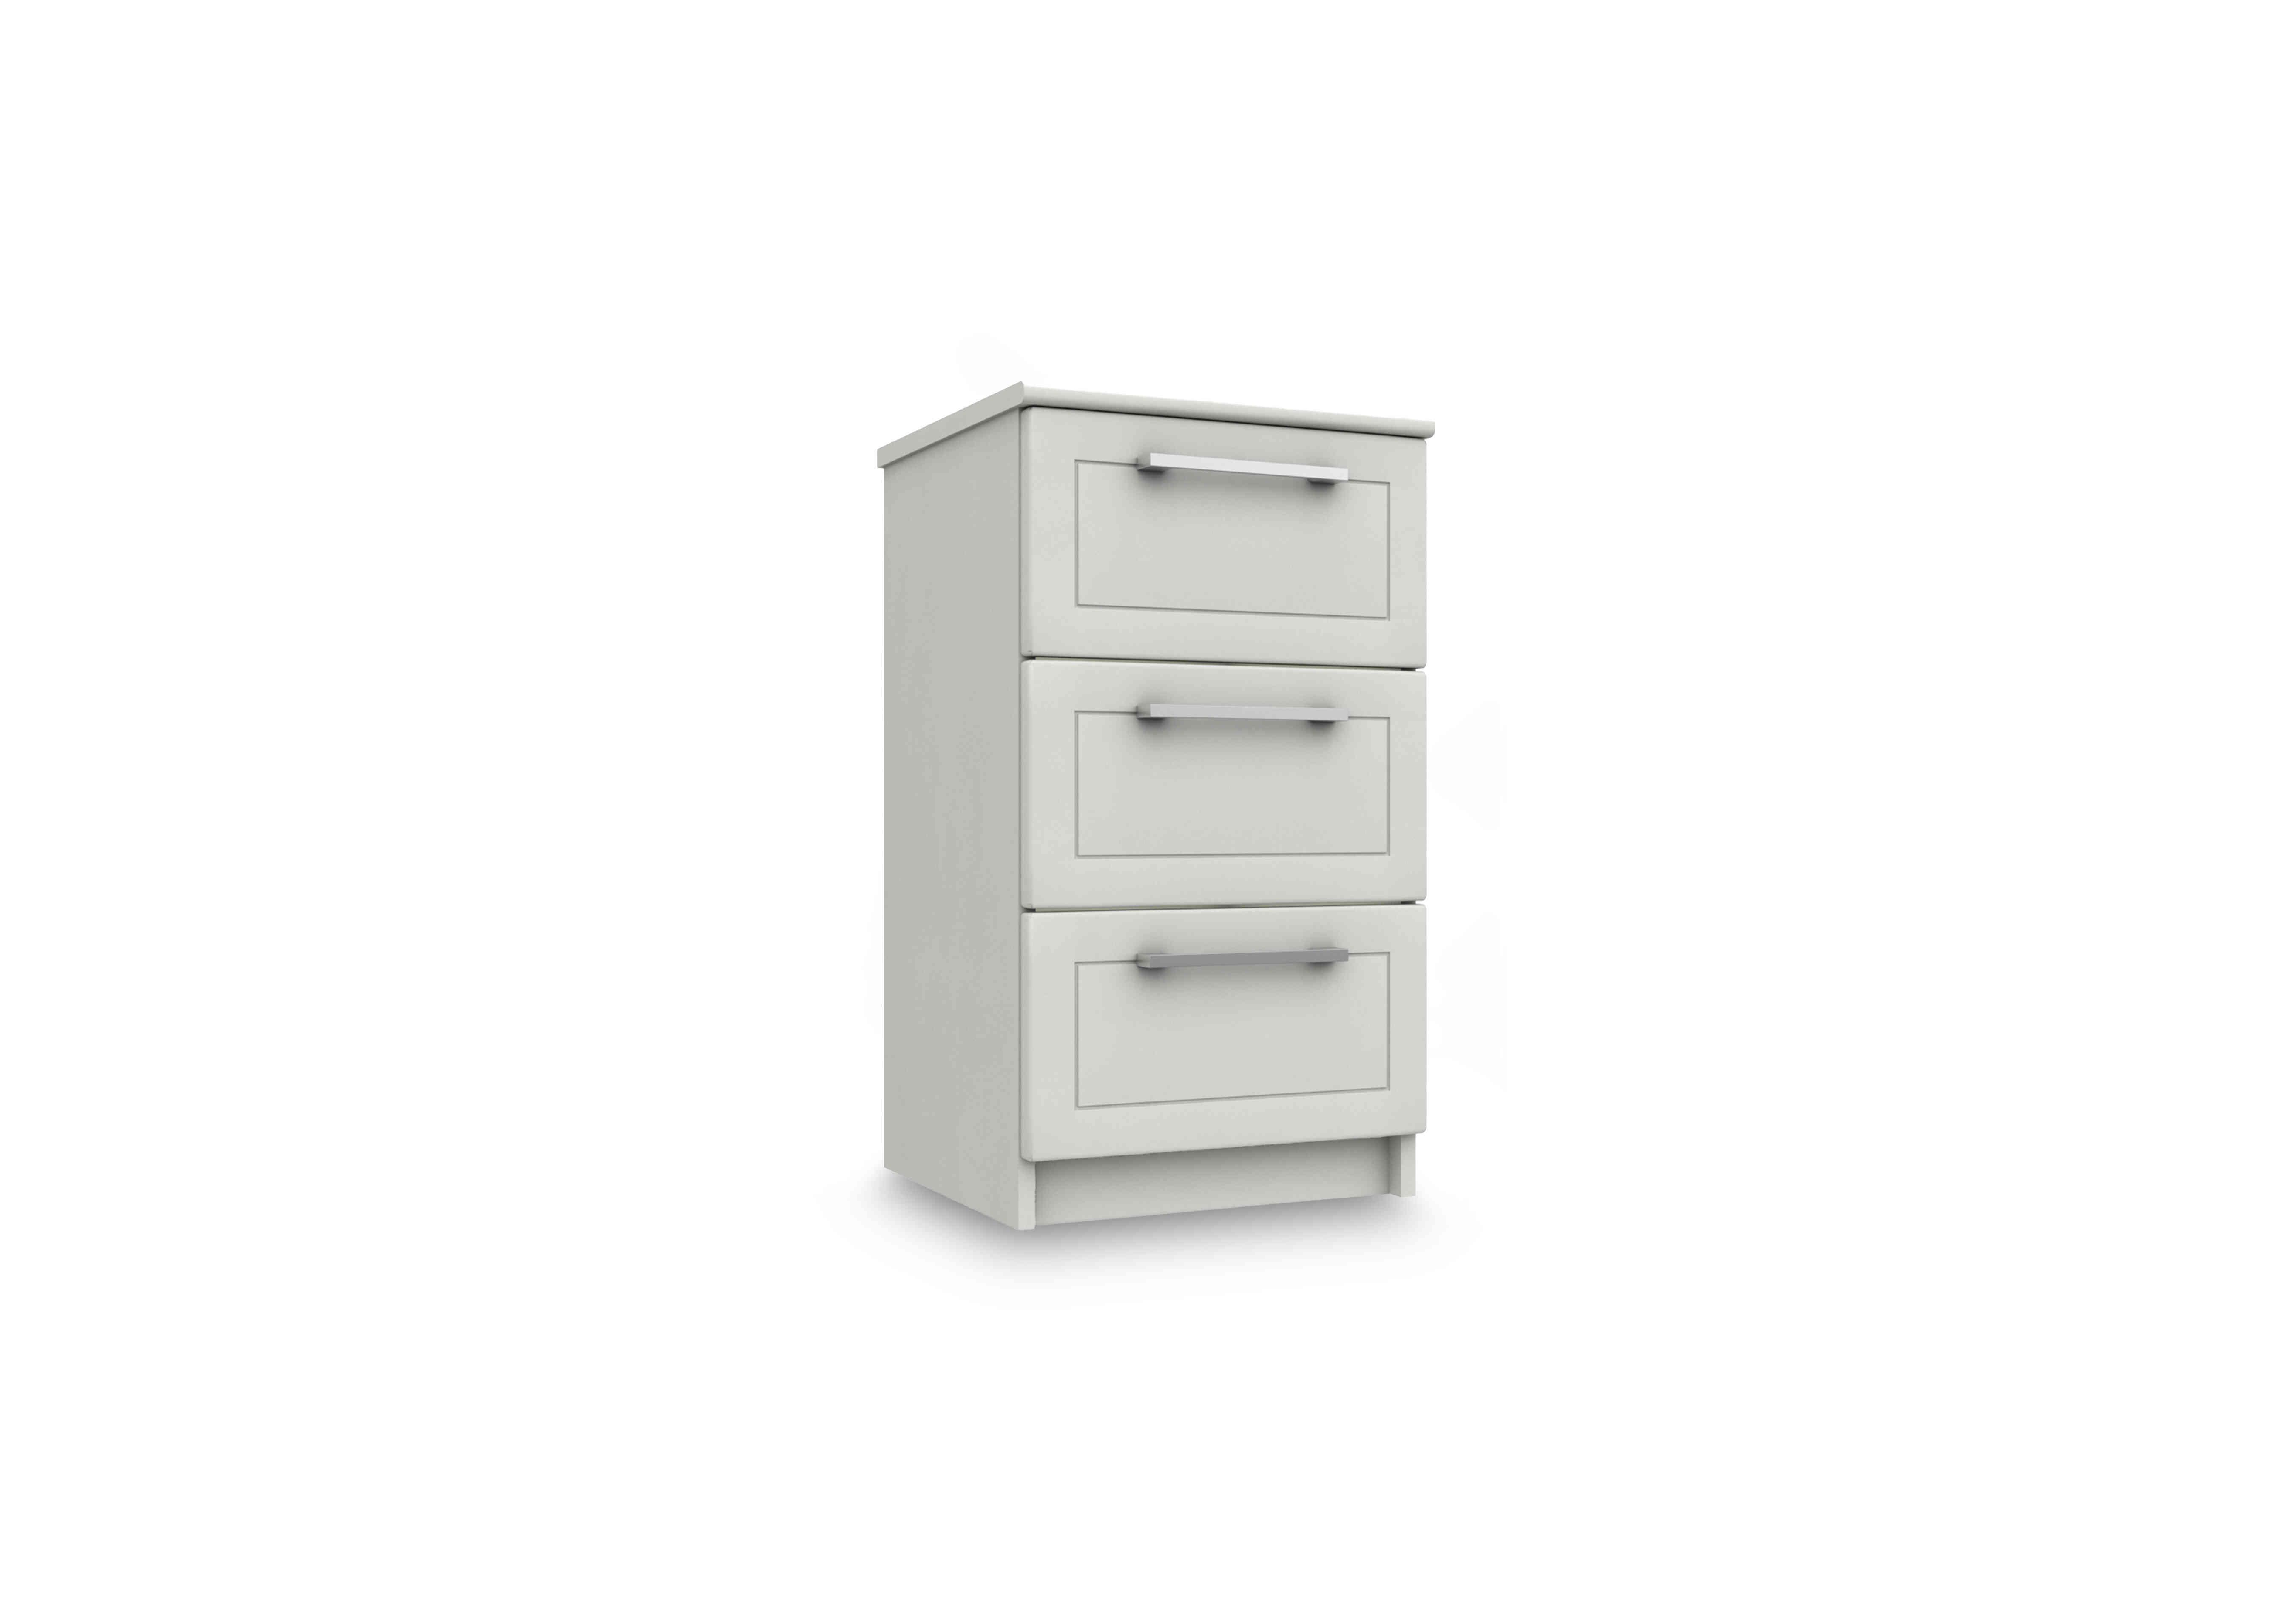 Bexley 3 Drawer Bedside Cabinet in White Gloss on Furniture Village